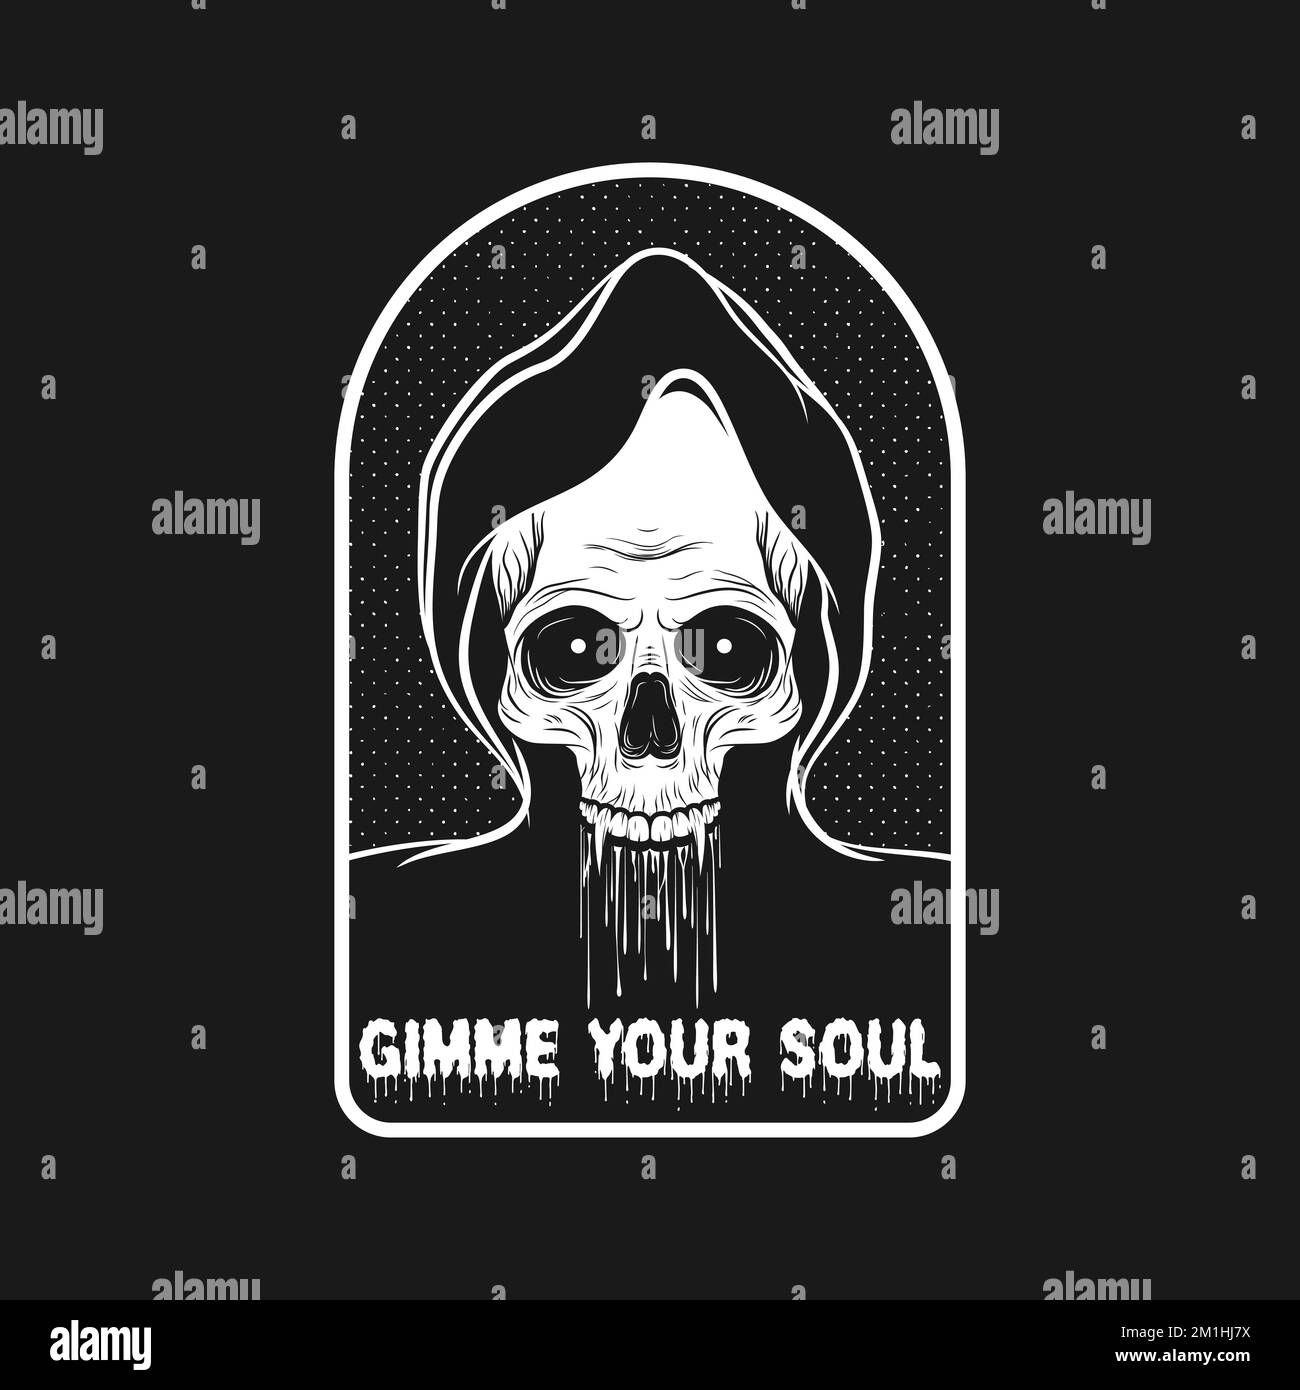 Gimme Your Soul, Skull and Zombie Typography Quote Design. Stock Vector